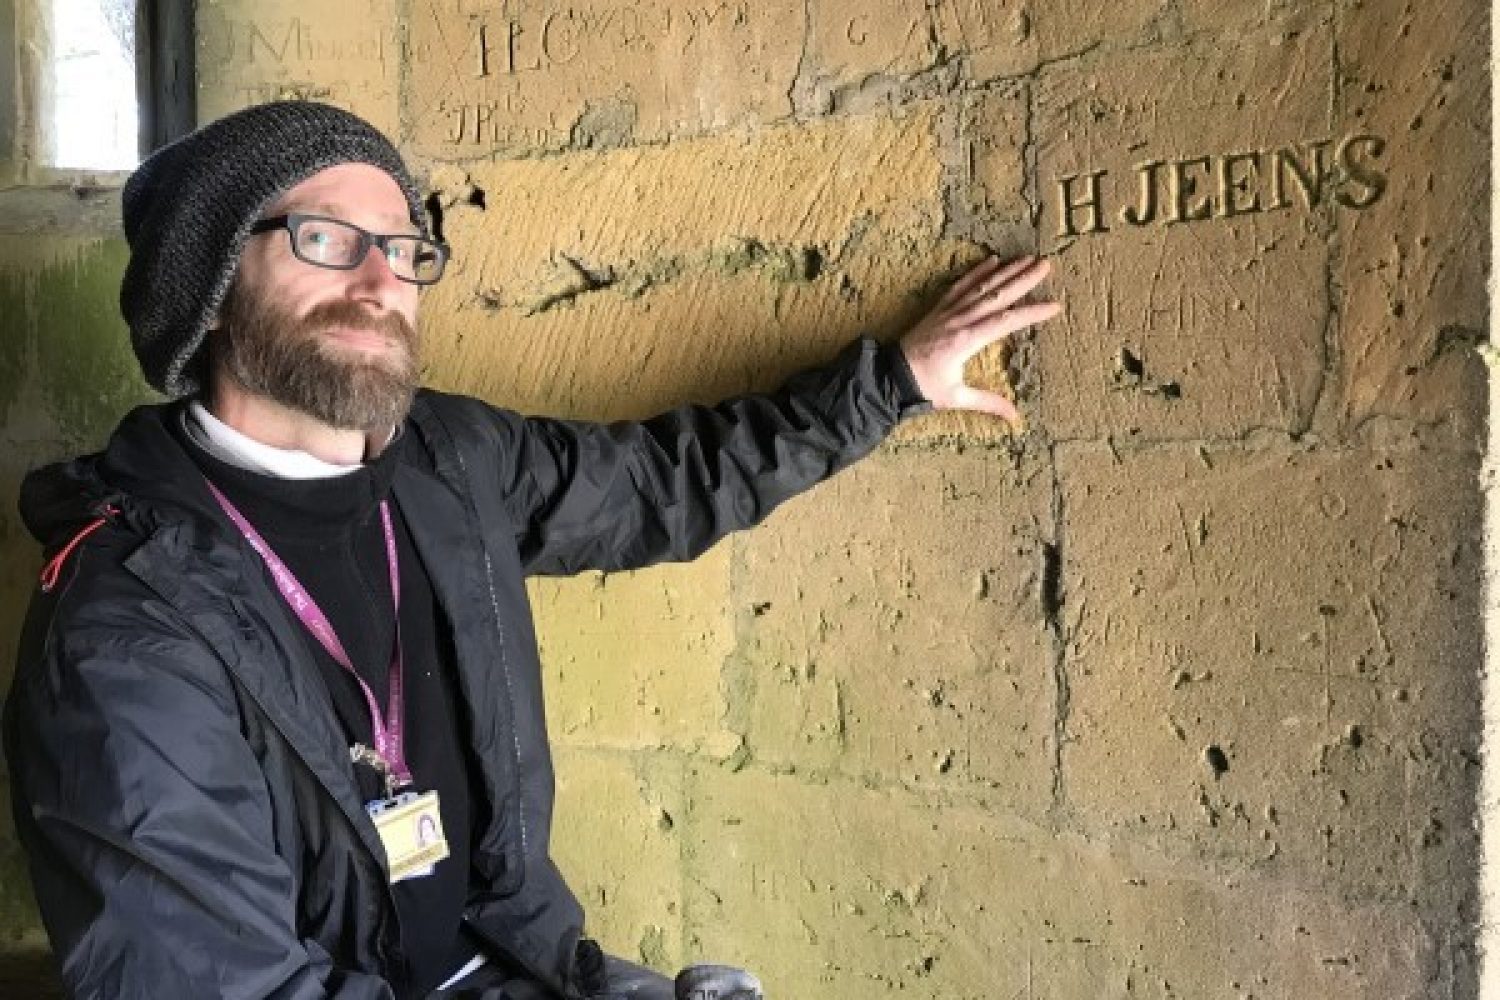 Man standing next to wall that has the text 'H Jeens' deeply carved into it